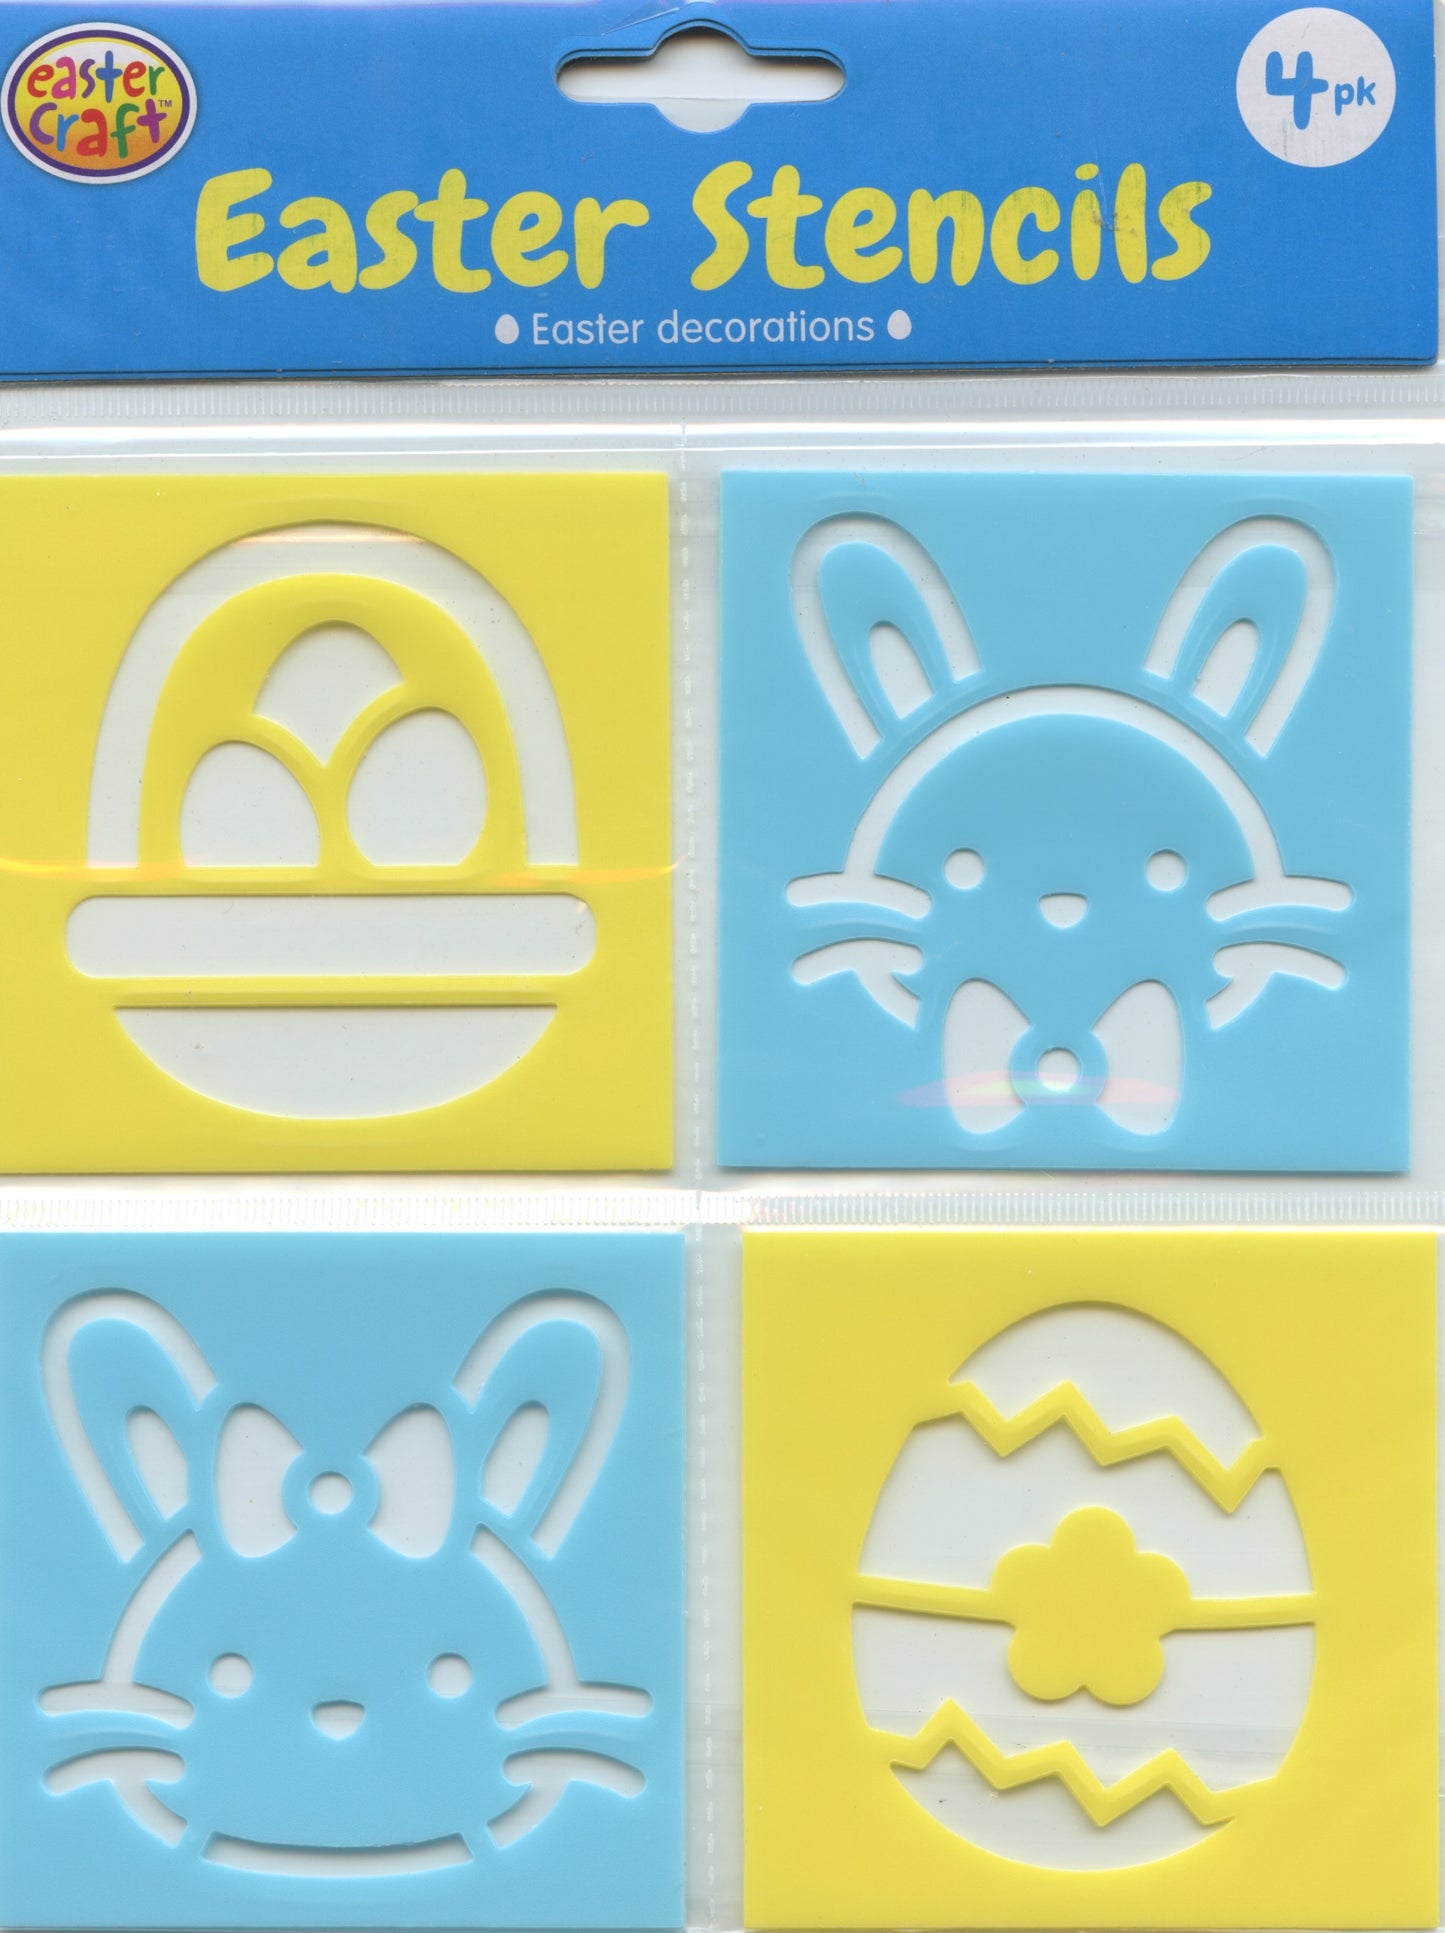 Easter Stencils - Eggs and Rabbits - 4 pk - Pack #2